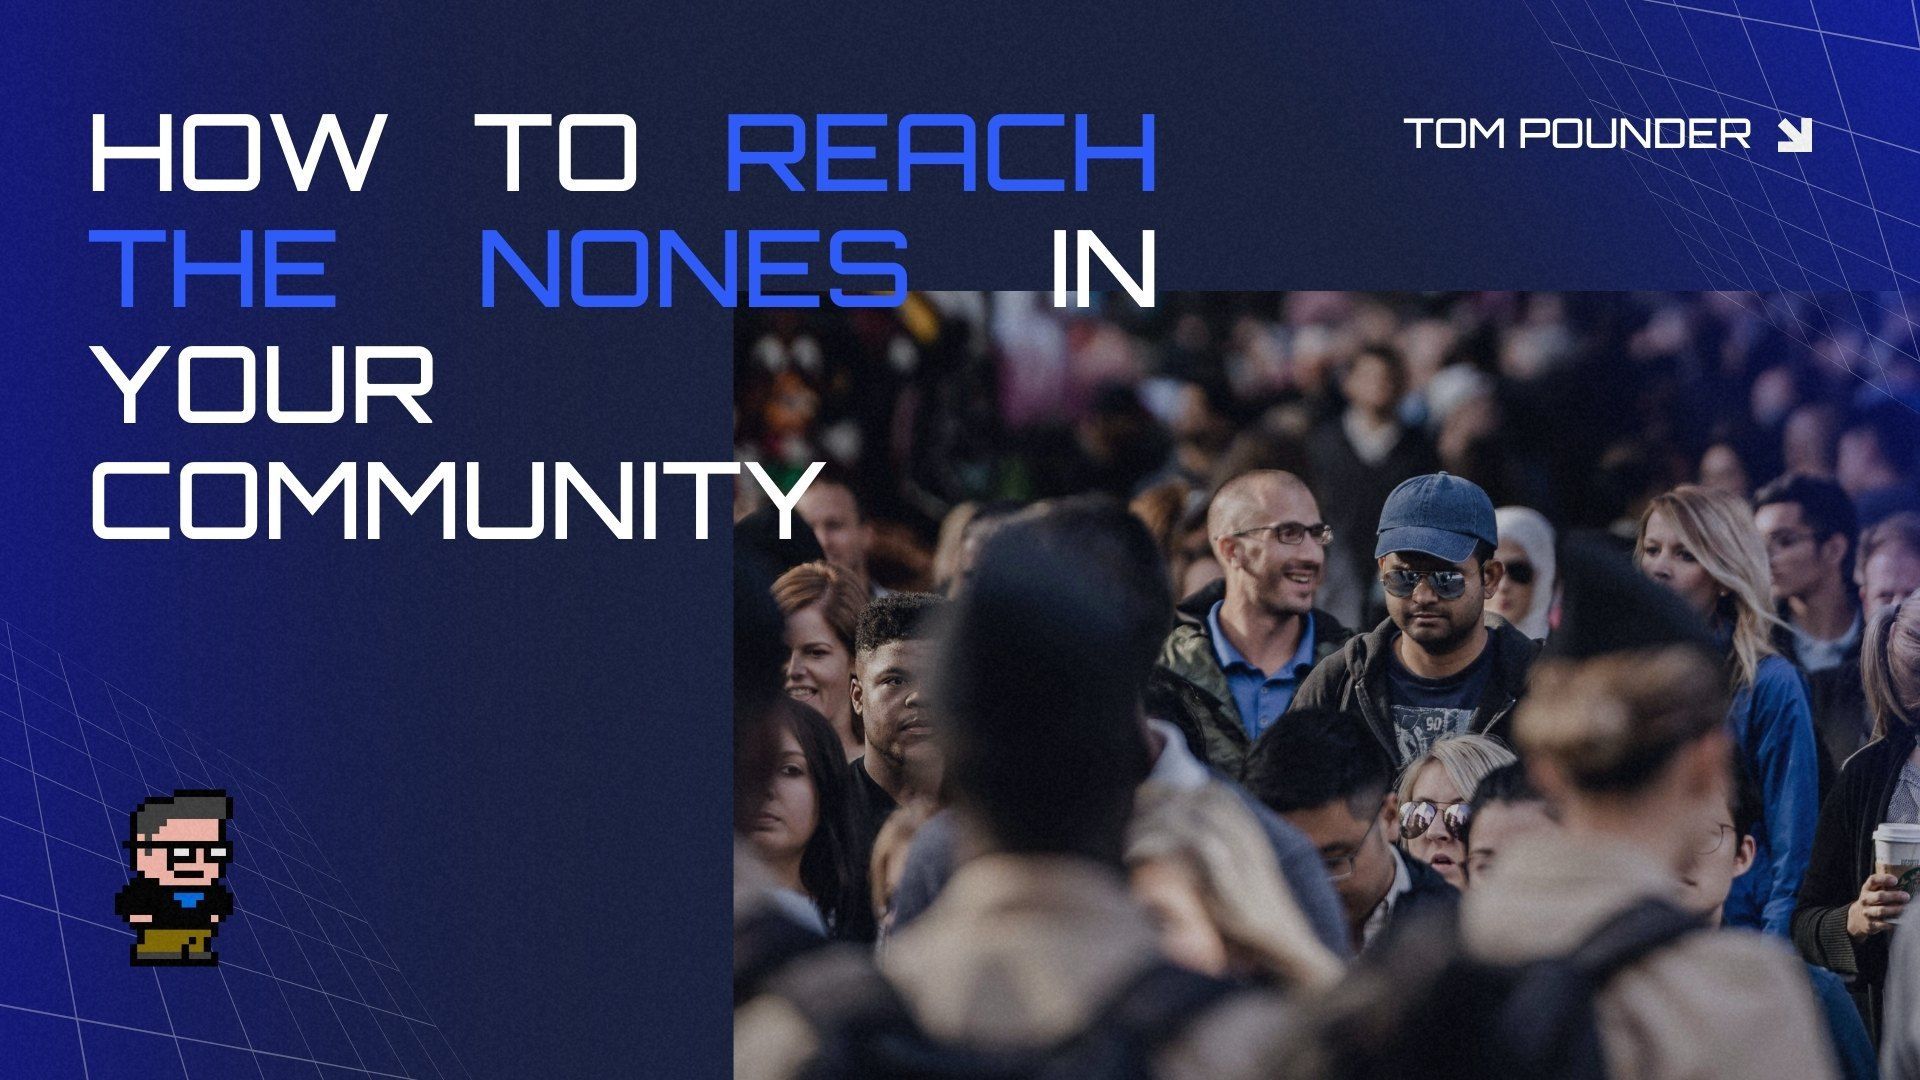 How to Reach the Nones in Your Community